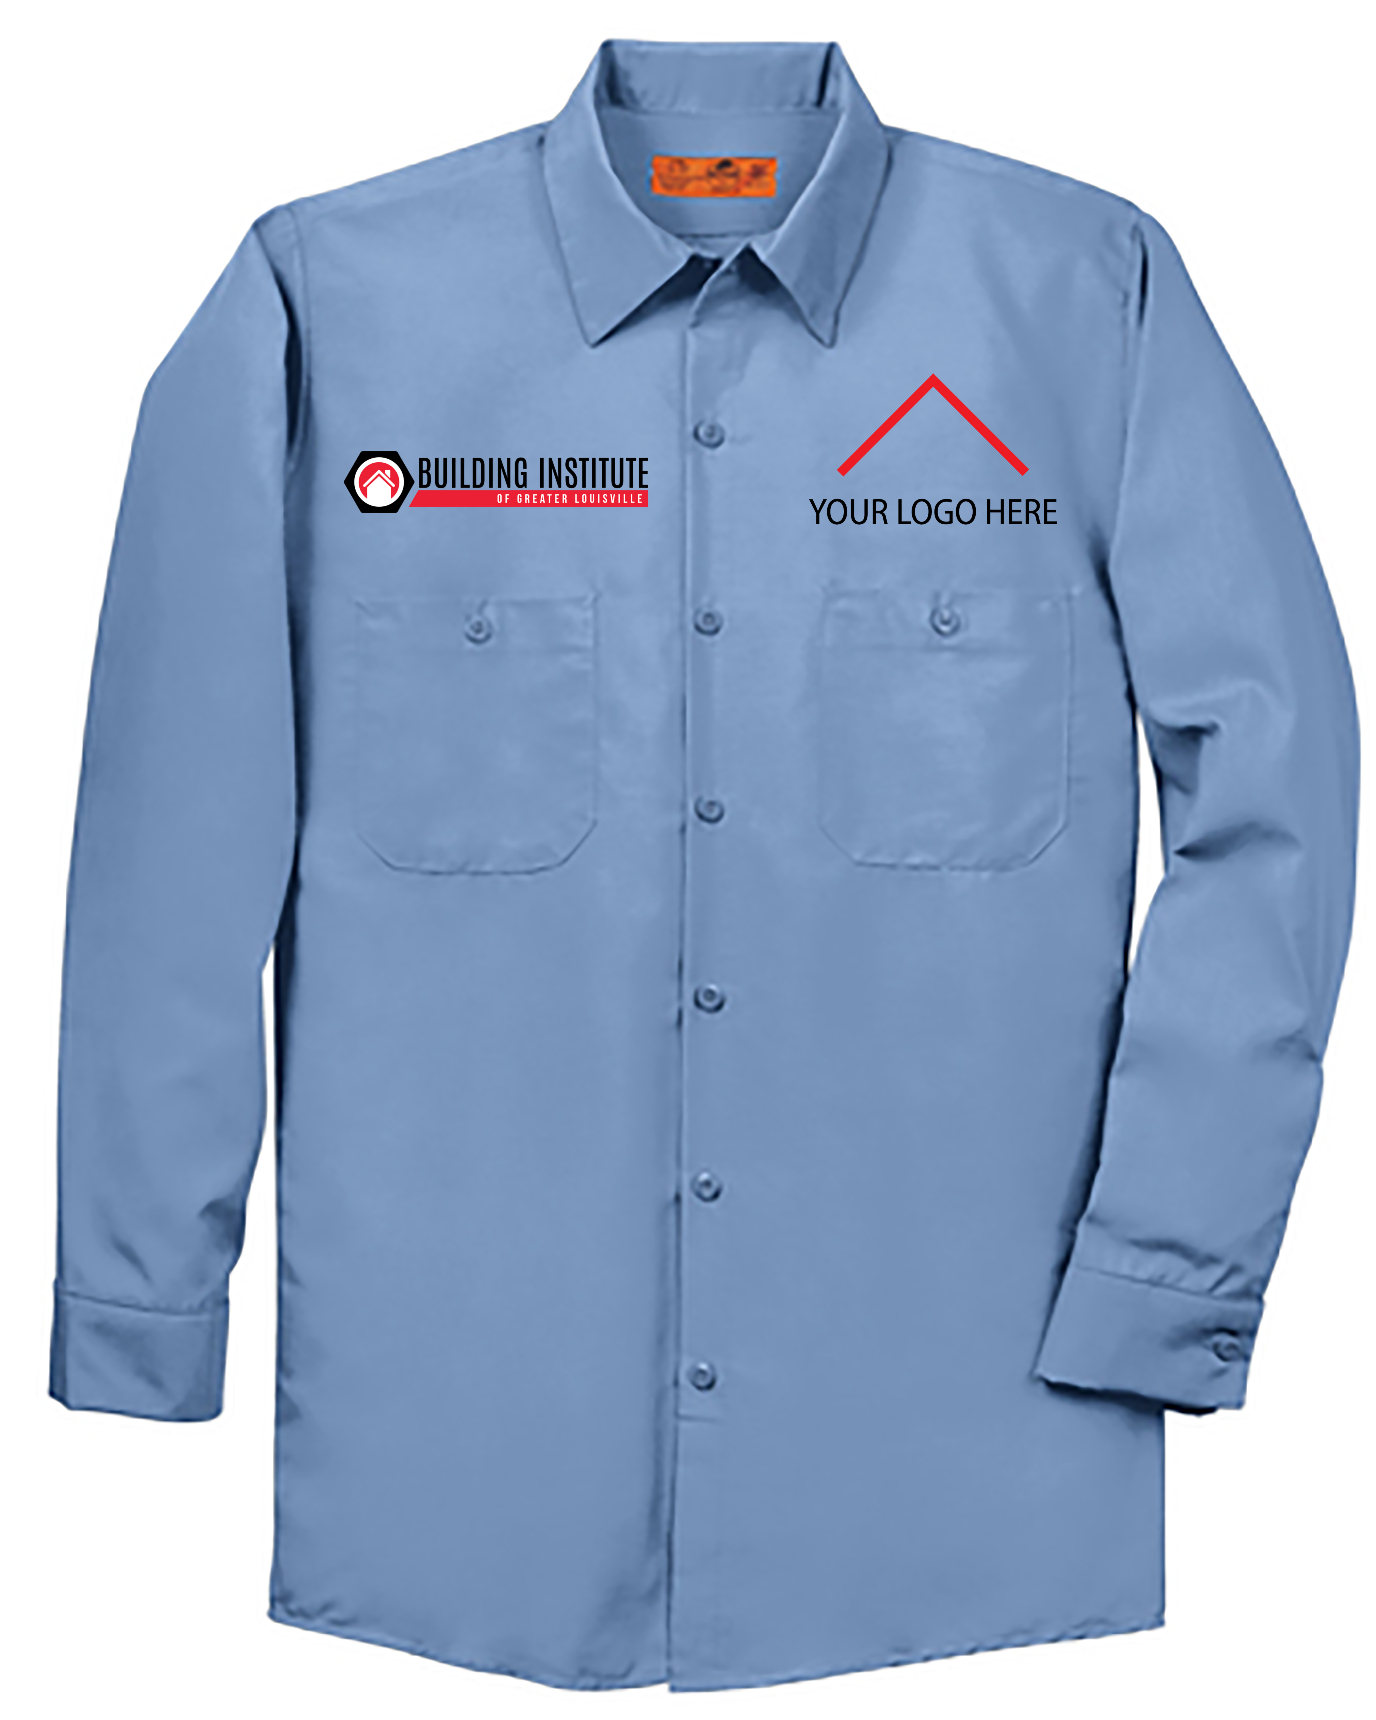 Building Institute - Red Kap® Long Size, Long Sleeve Industrial Work Shirt - SP14LONG (Add Your Own)